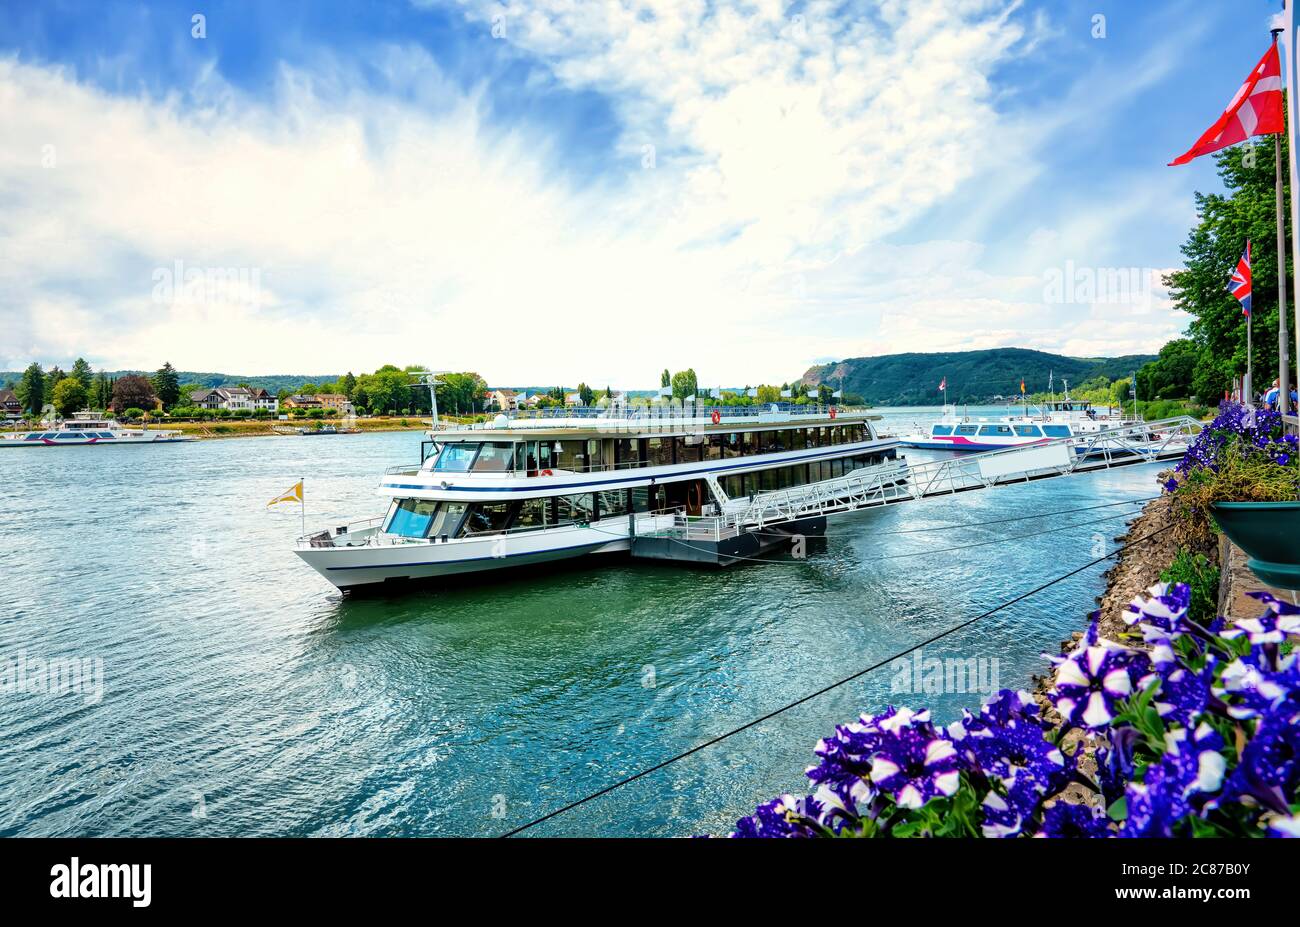 Rhine bank with ferry and sightseeing boat in Linz am Rhein (Linz on the rhine), Germany Stock Photo